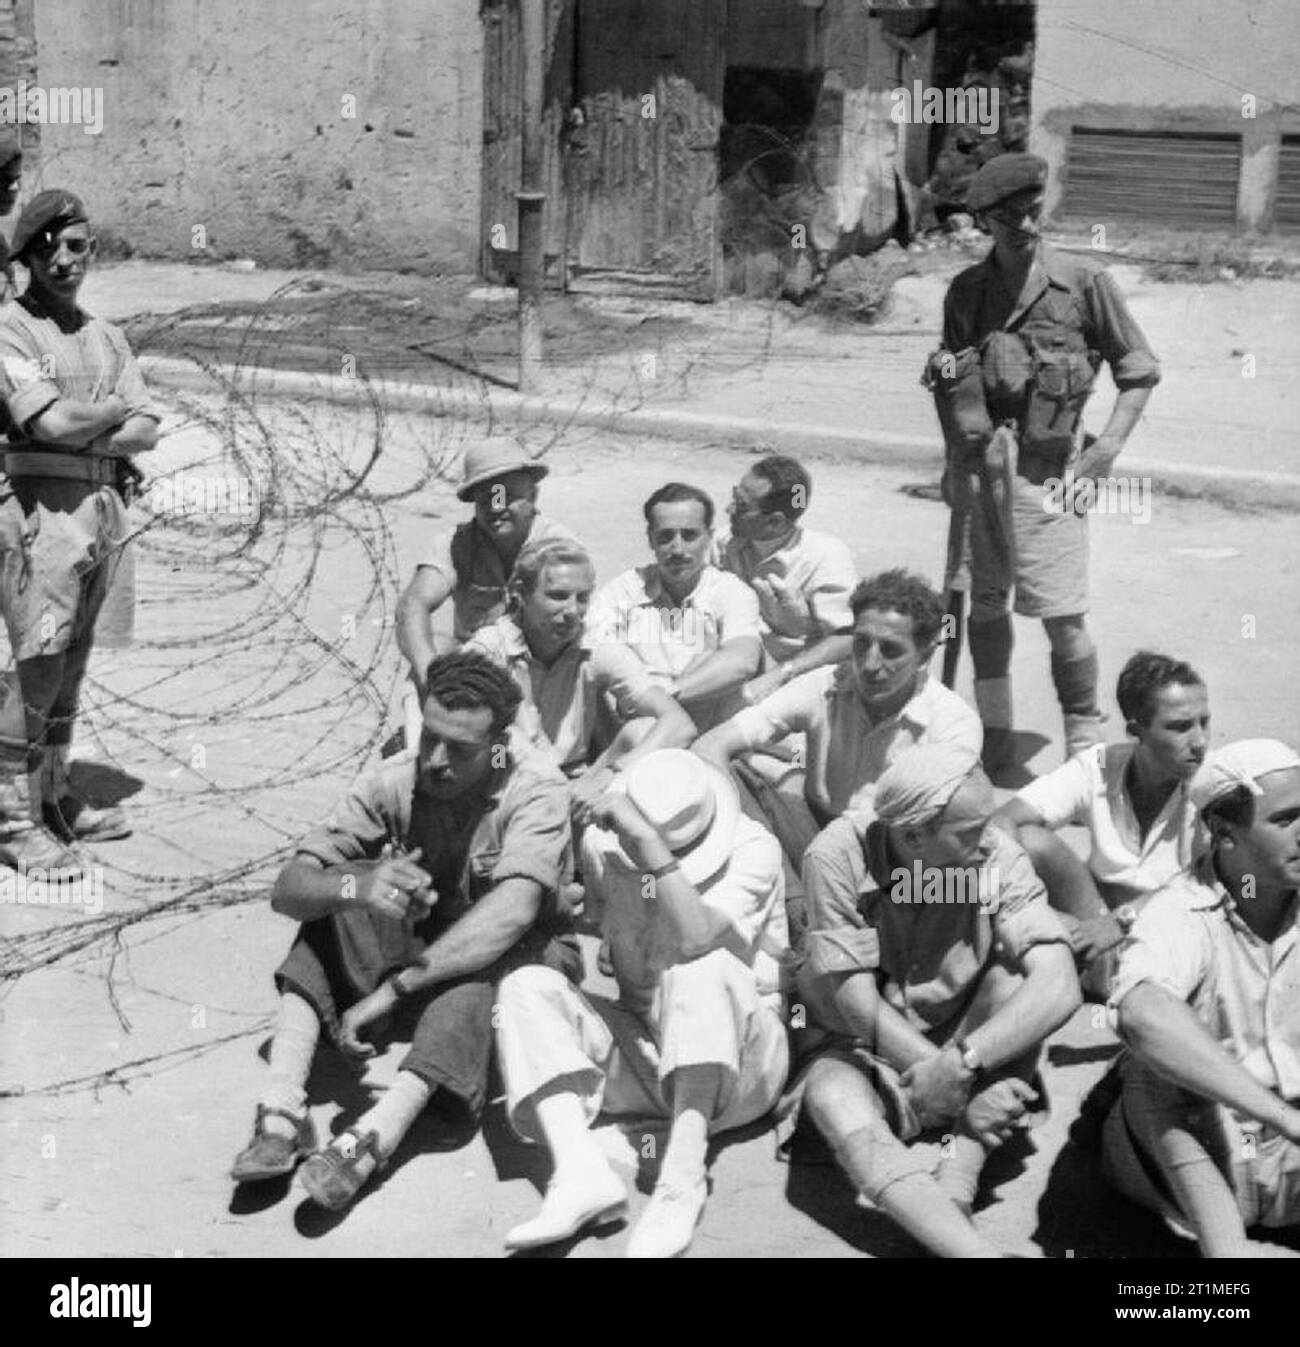 The British Mandate in Palestine 1917-1948 British paratroops guard Jewish suspects rounded up in Haifa during one of the cordon-and-sweep operations designed to root out guerrillas. Stock Photo